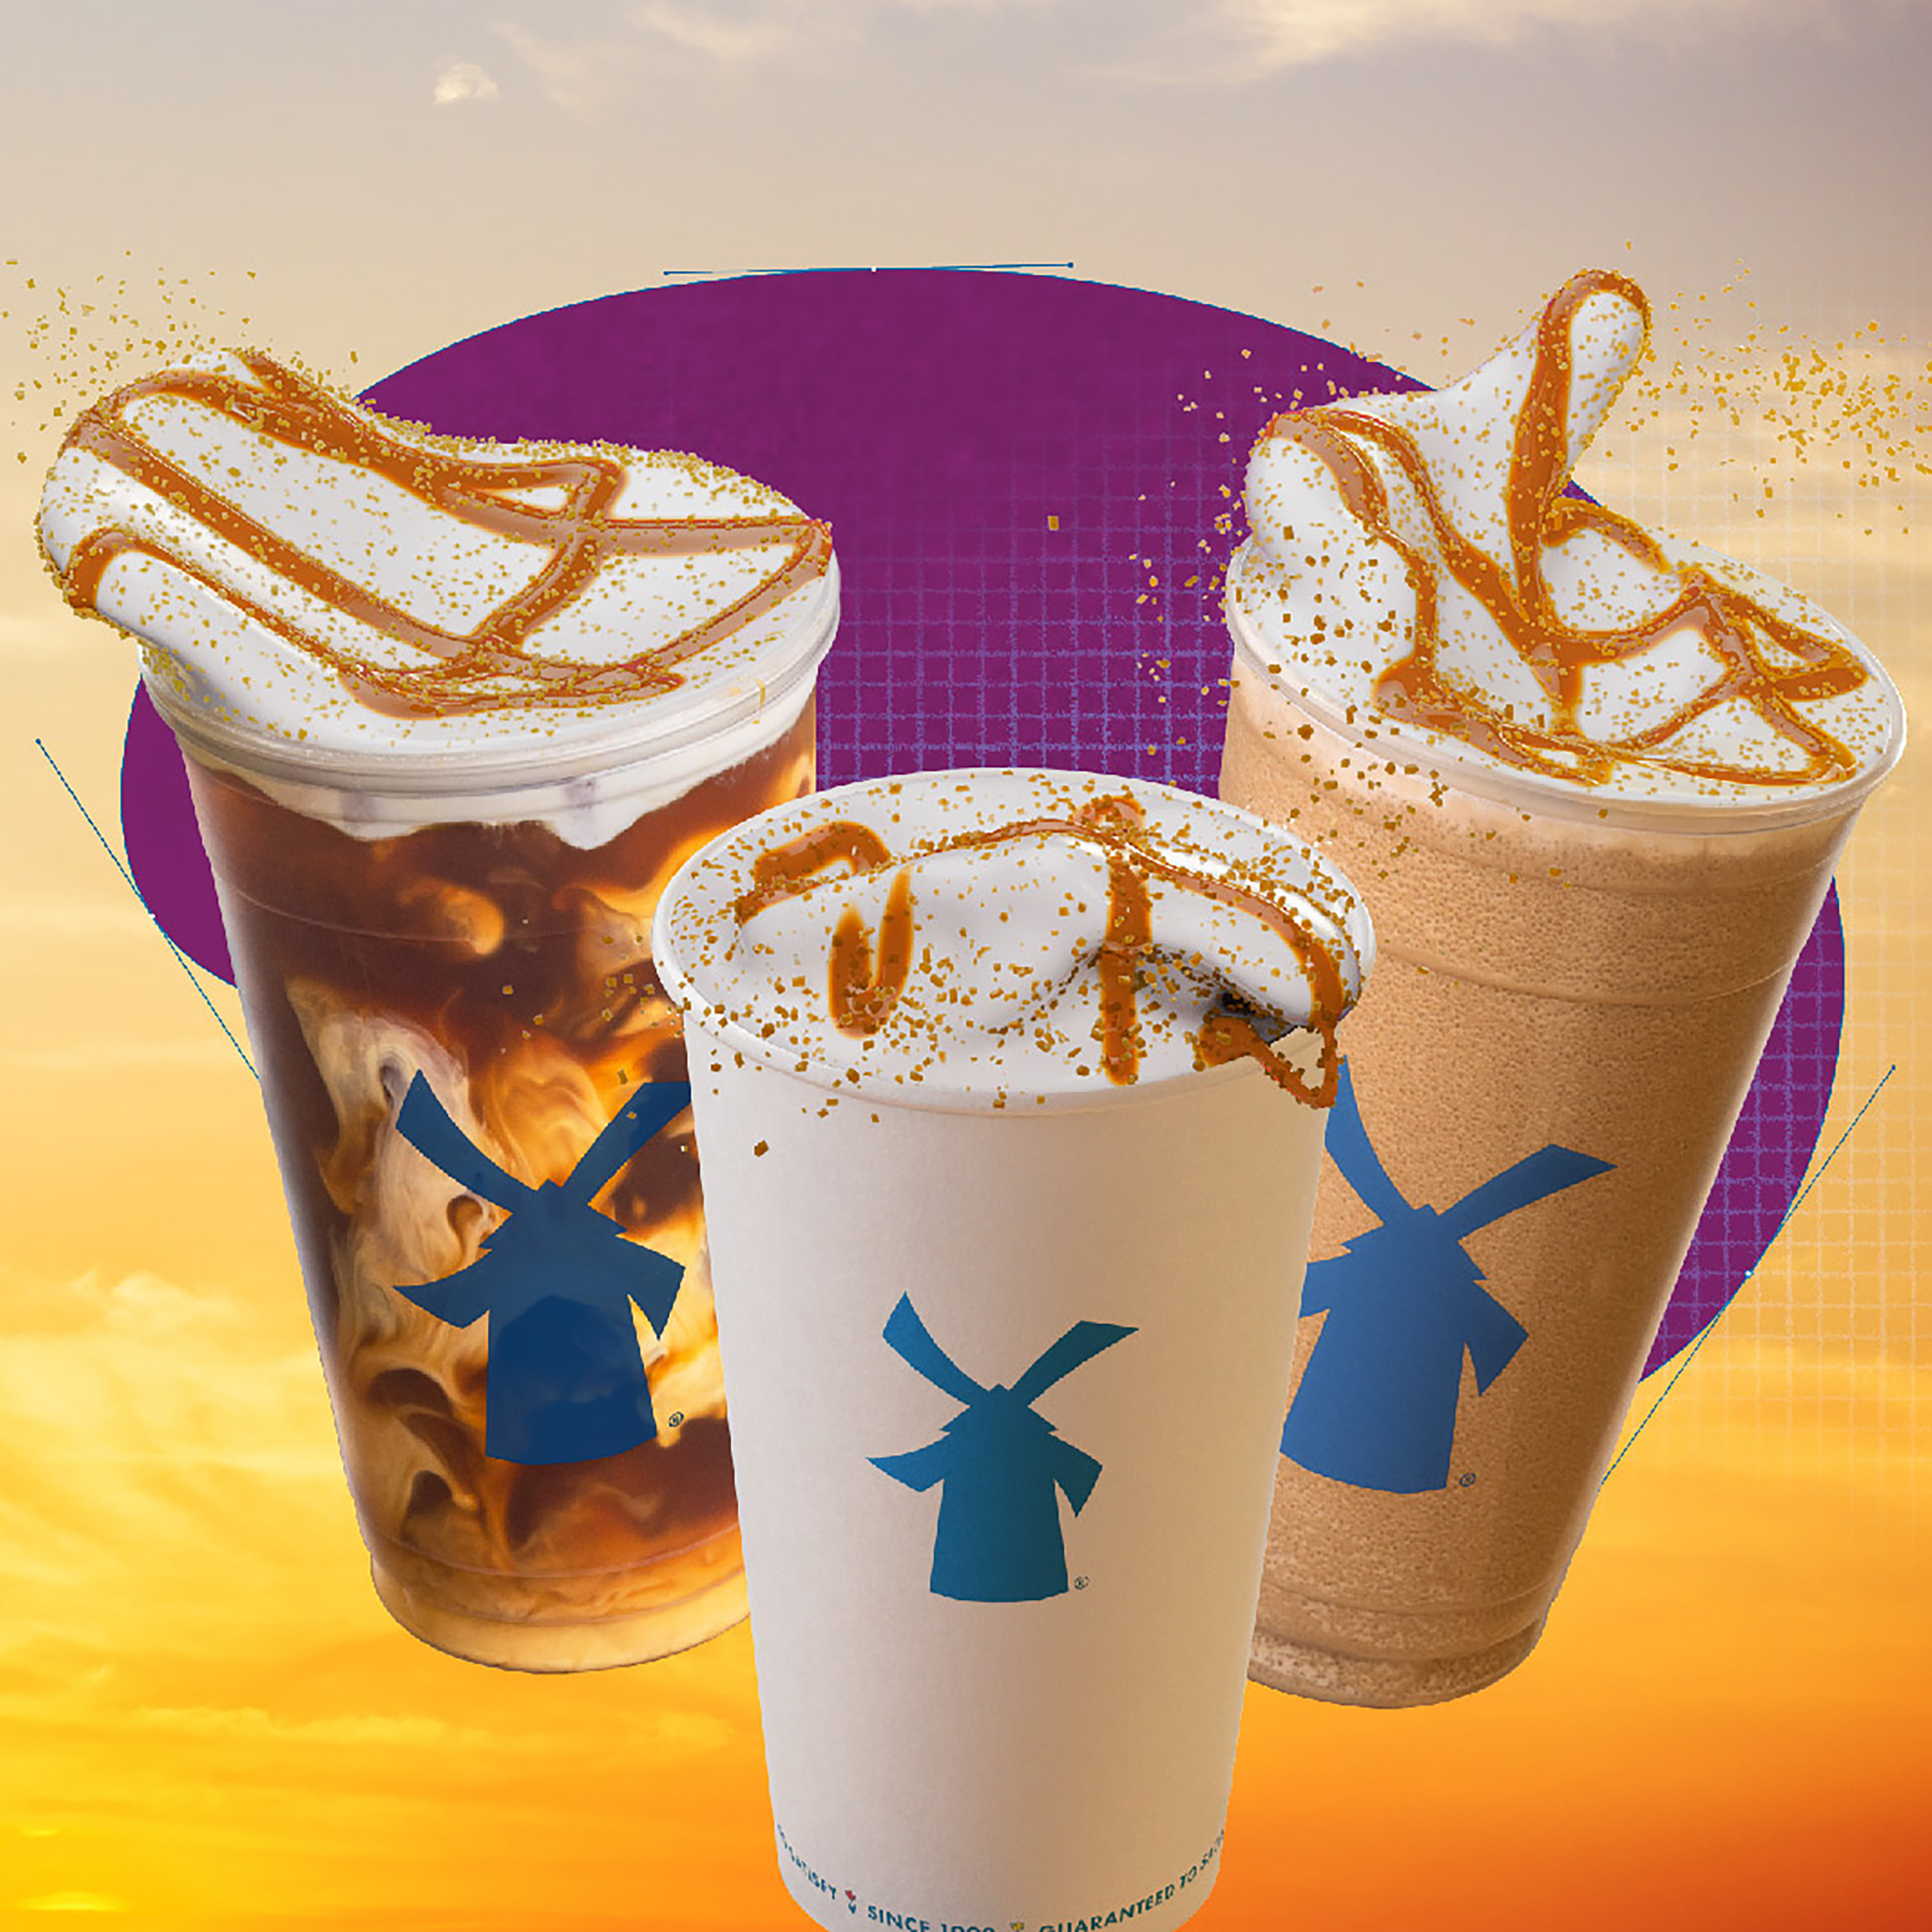 The Caramel Pumpkin Brûlée can be ordered as a Breve, Cold Brew or Freeze (Dutch Bros’ blended coffee), featuring pumpkin and salted caramel flavors topped with Dutch Bros’ signature Soft Top, pumpkin drizzle and raw sugar sprinks.